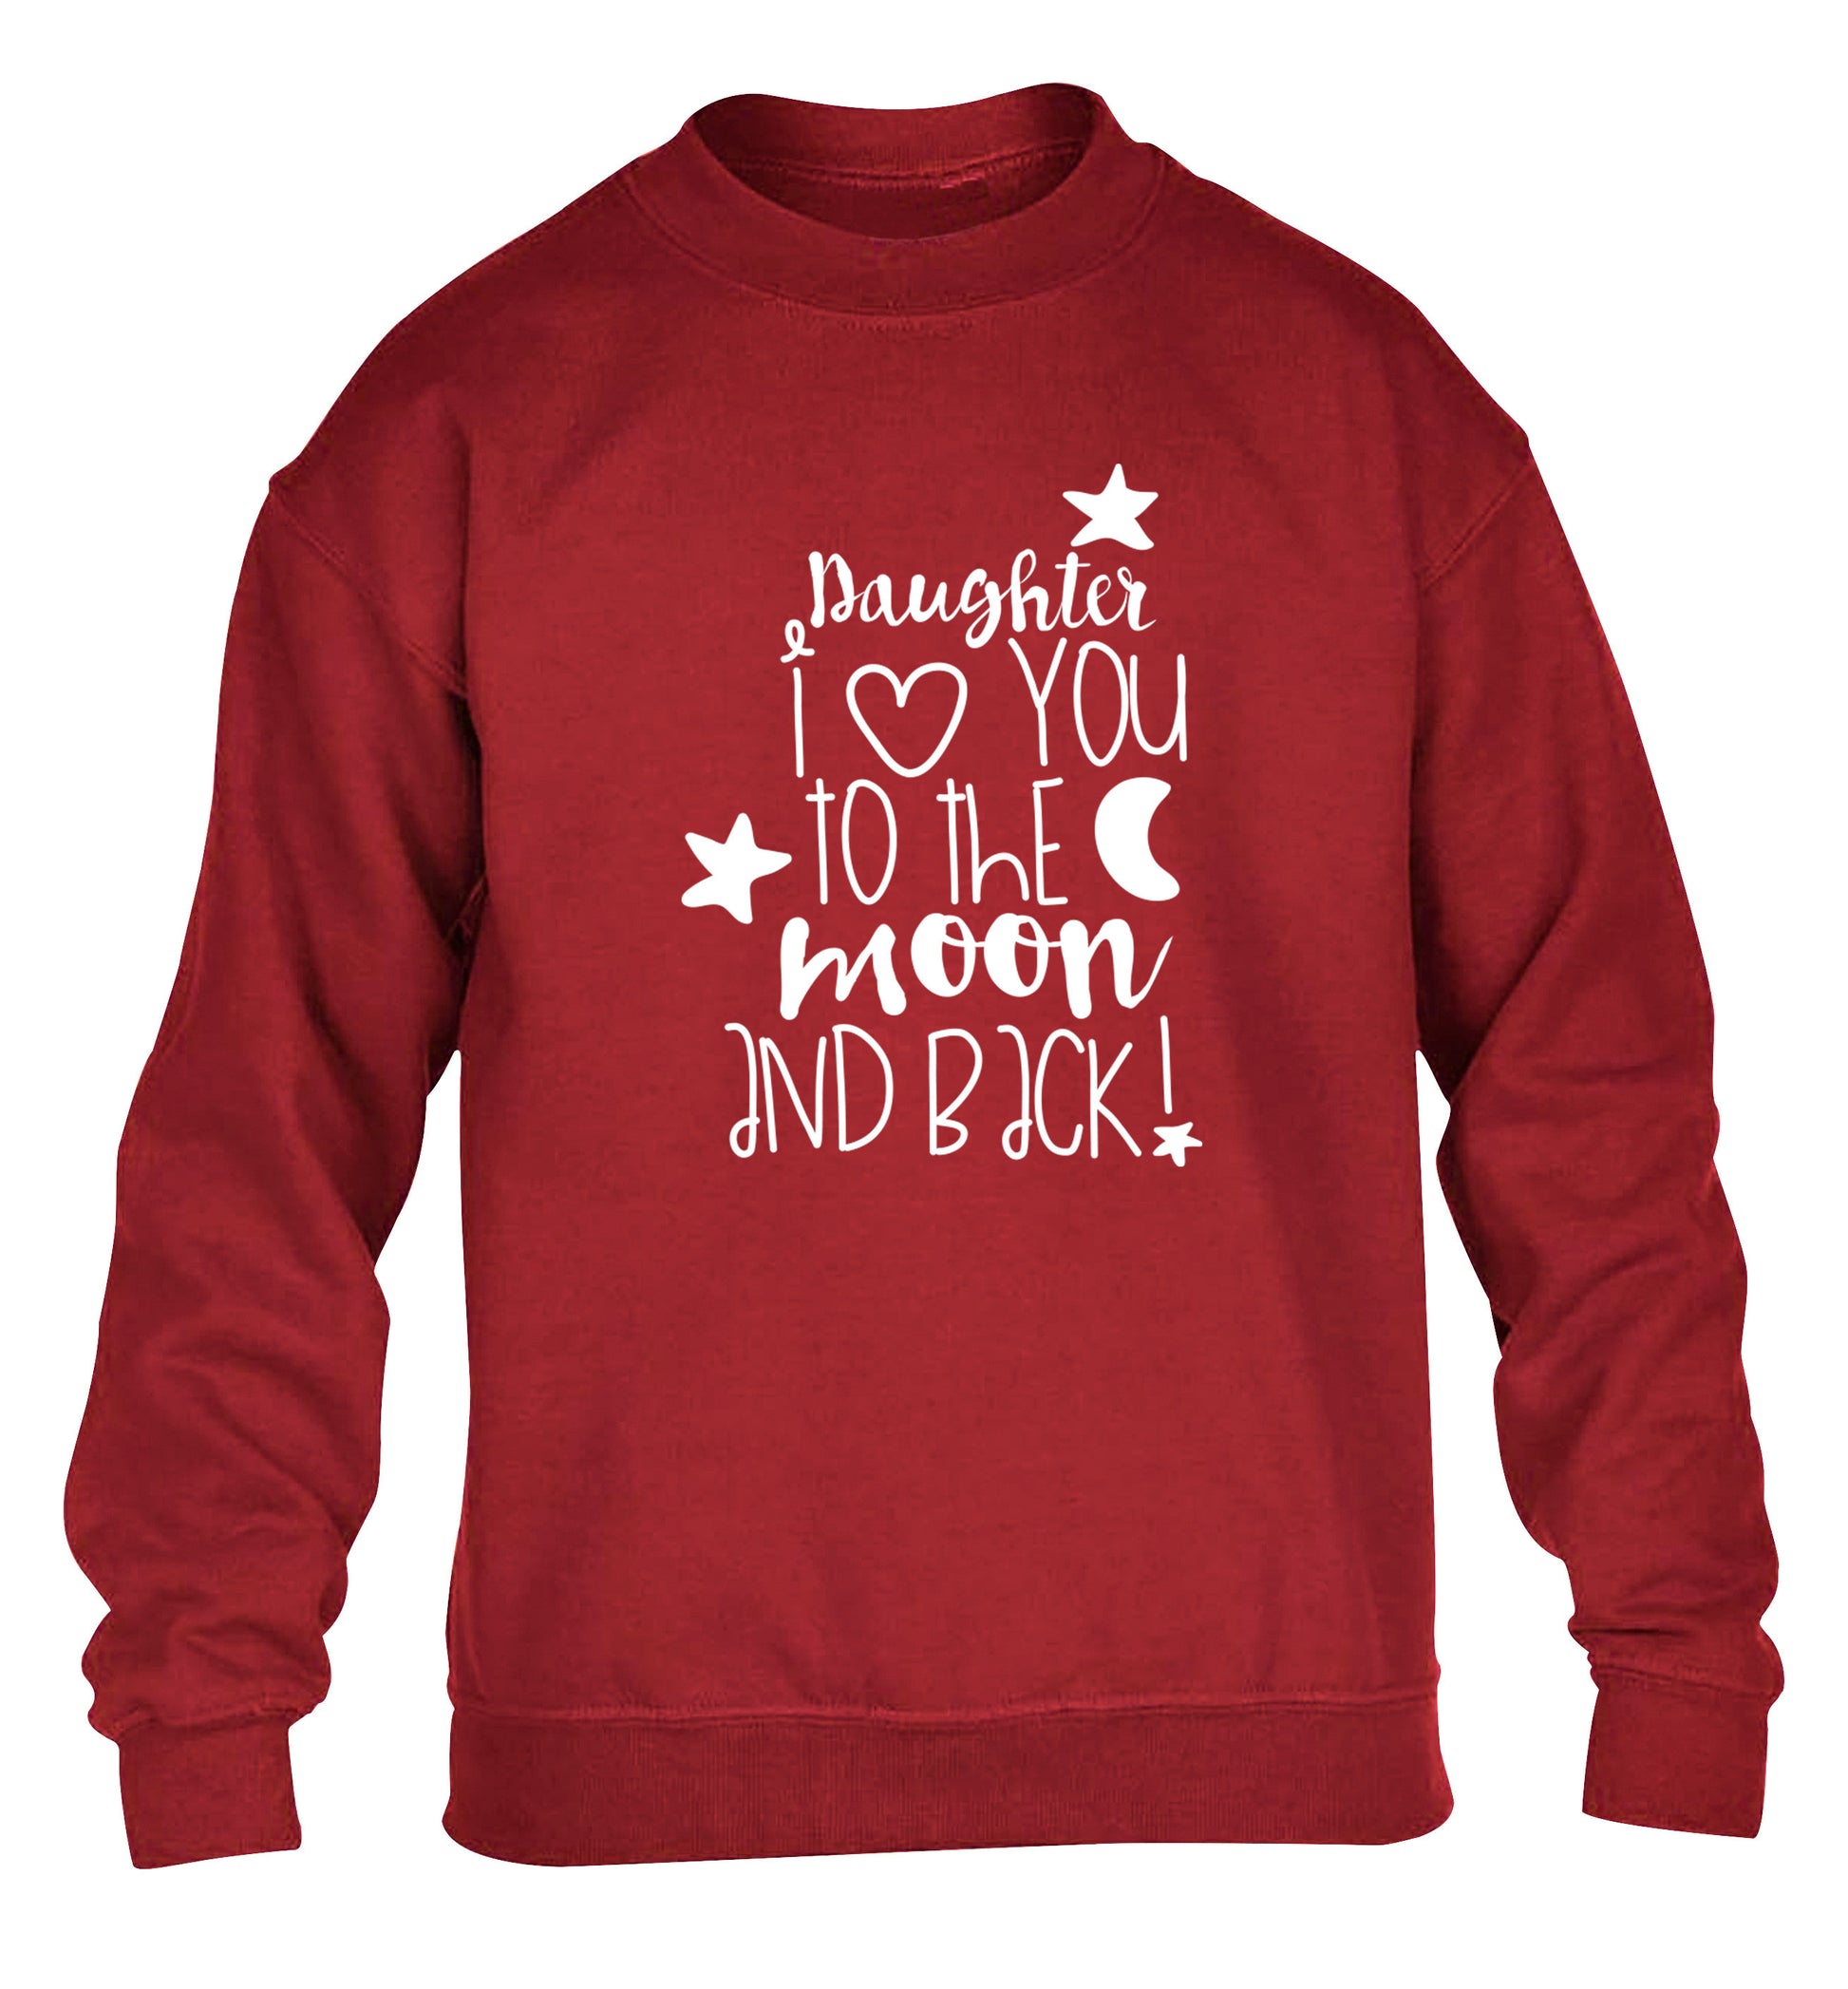 Daughter I love you to the moon and back children's grey  sweater 12-14 Years